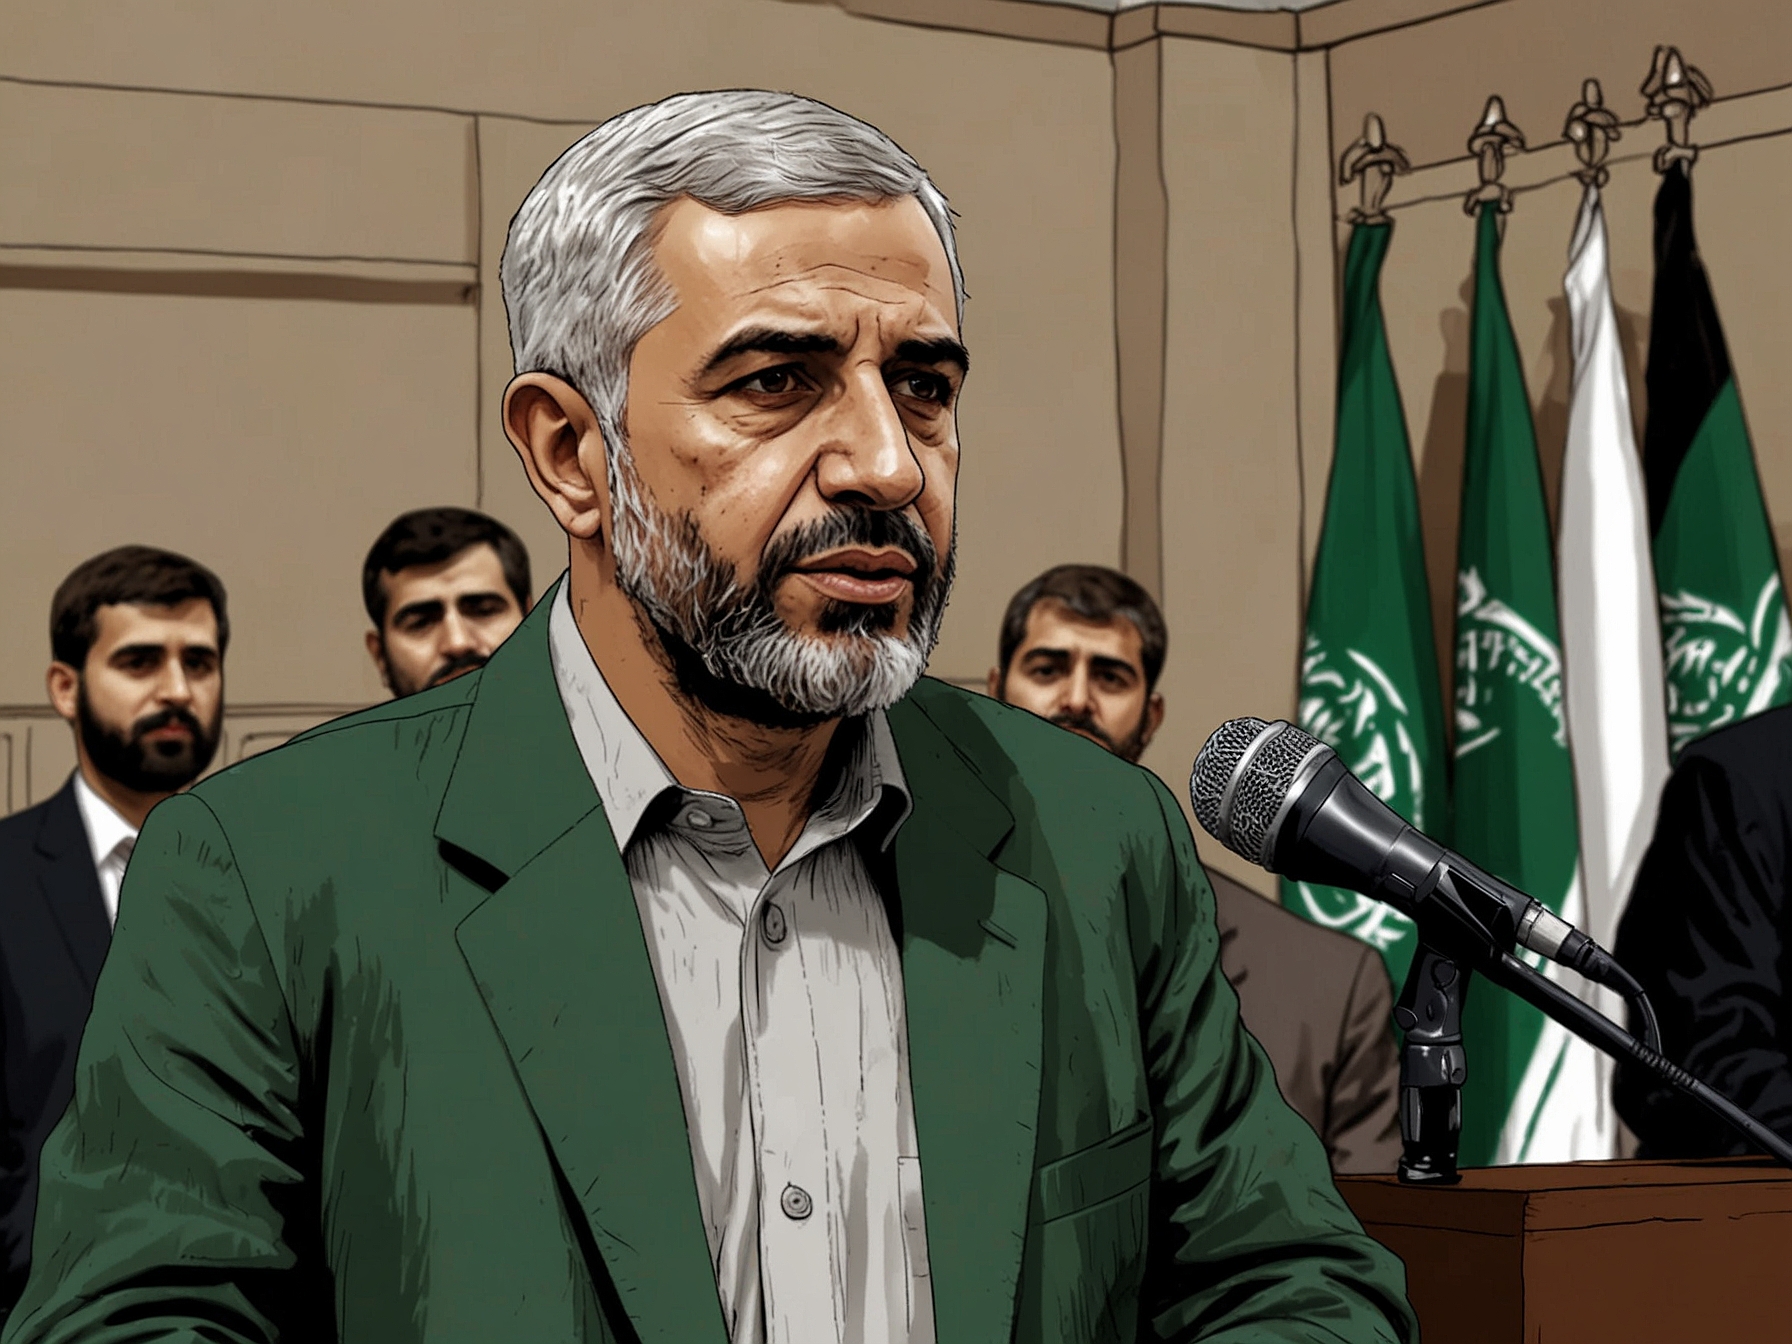 Yahya Sinwar, leader of Hamas, speaking at a press conference, illustrating his public humiliation of U.S. officials and the strategic use of media for propaganda.